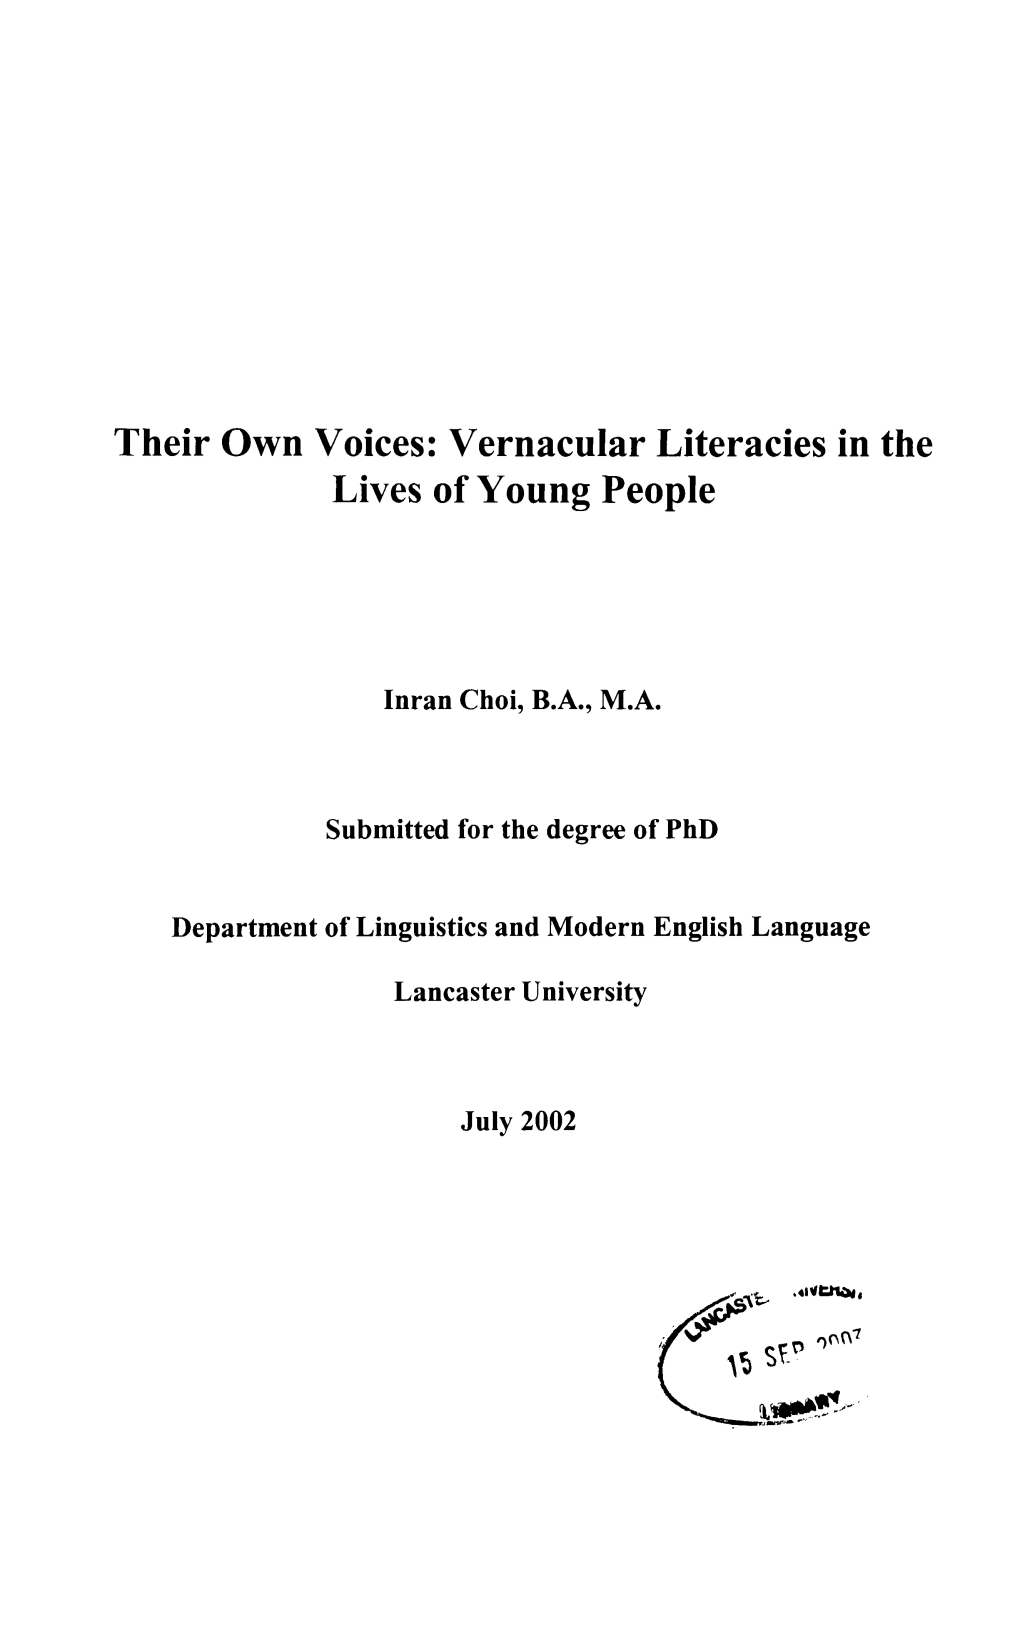 Vernacular Literacies in the Lives of Young People